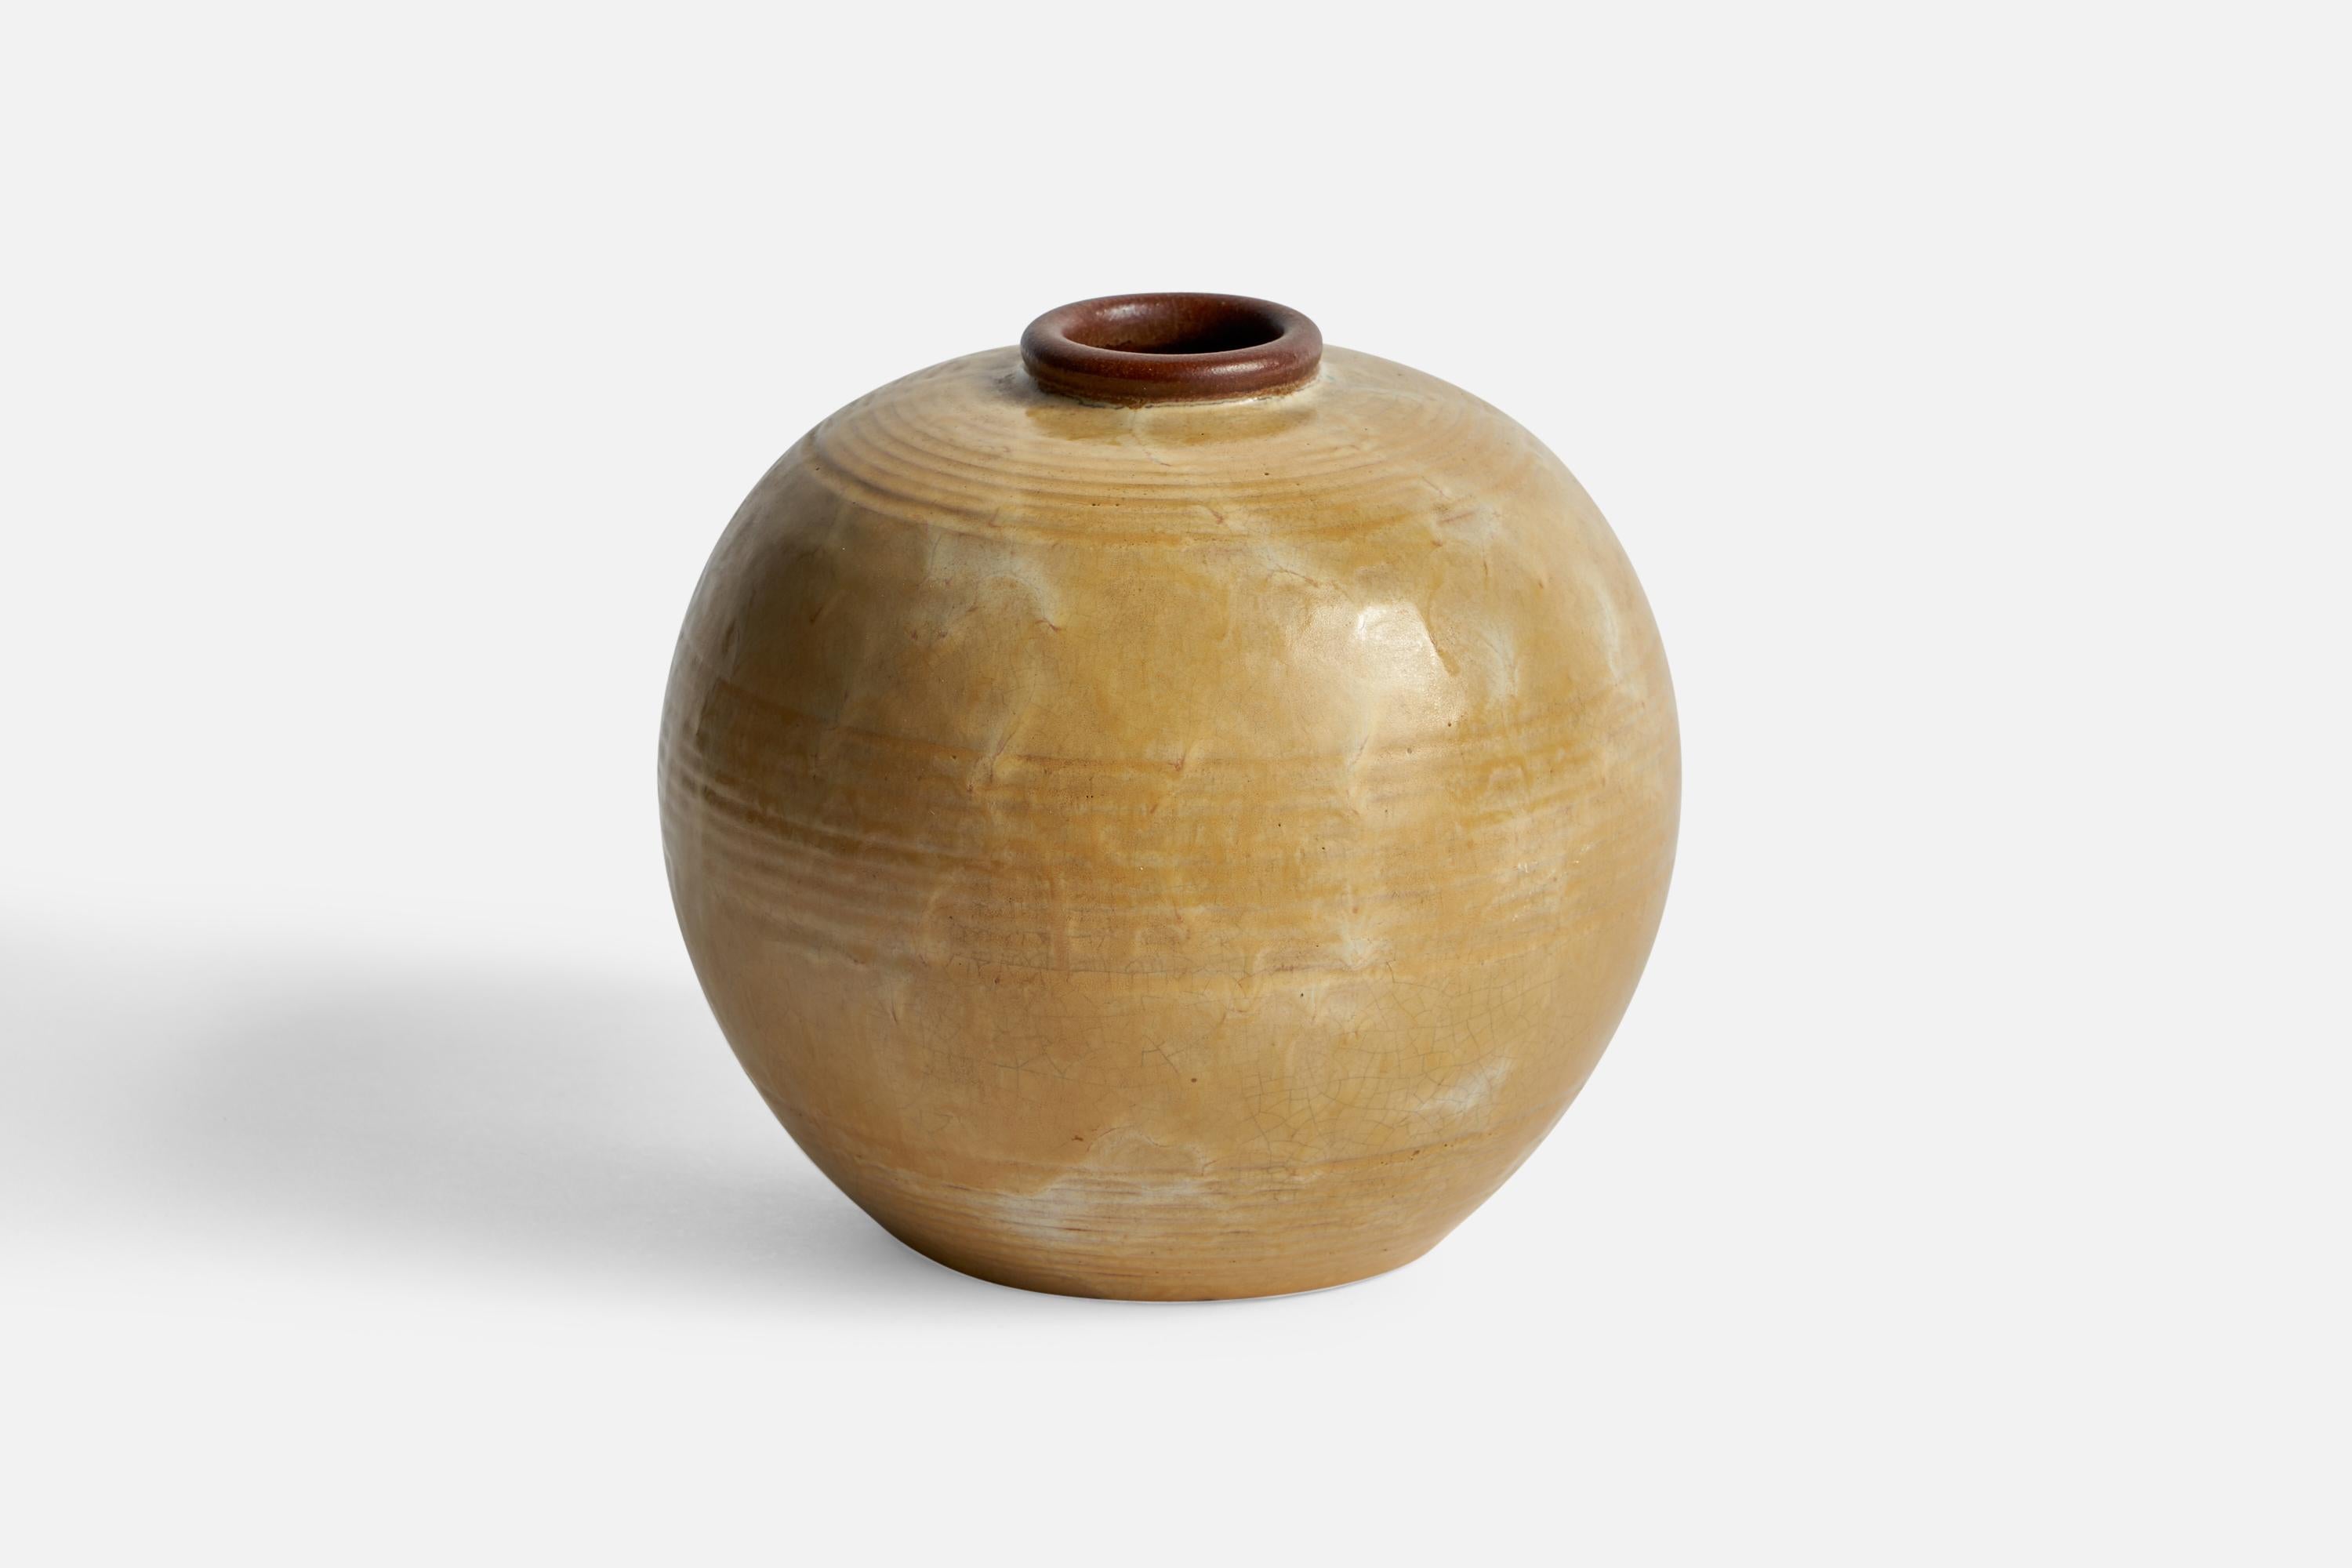 A beige and brown-glazed earthenware vase designed by Anna-Lisa Thomson and produced by Upsala Ekeby, Sweden, 1930s.